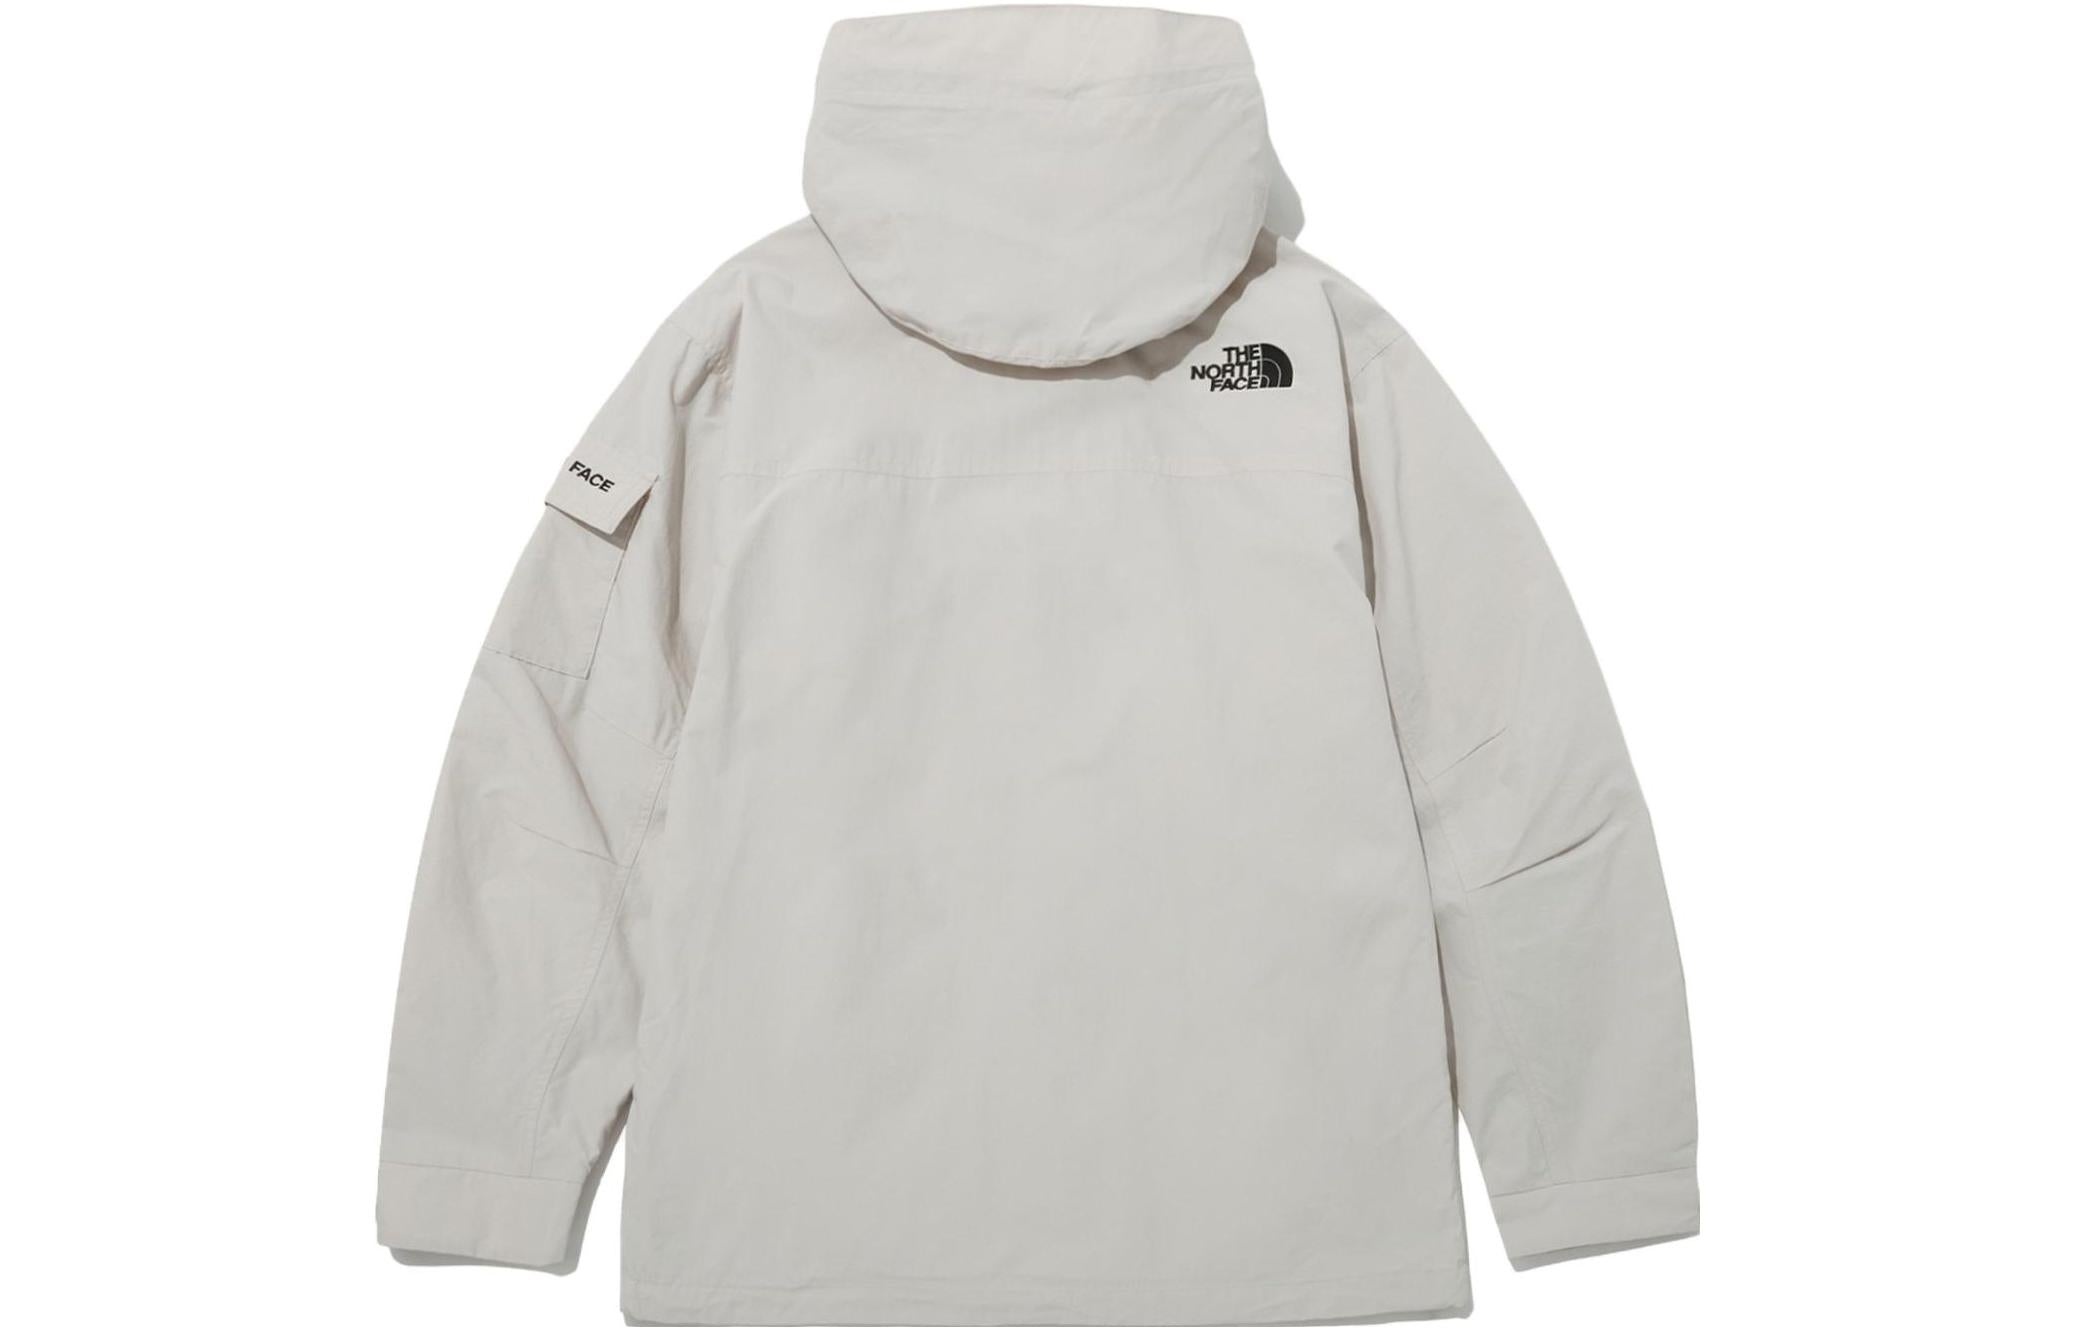 THE NORTH FACE FW23 Mountain Jacket 'Beige' NJ3BP11B - 3